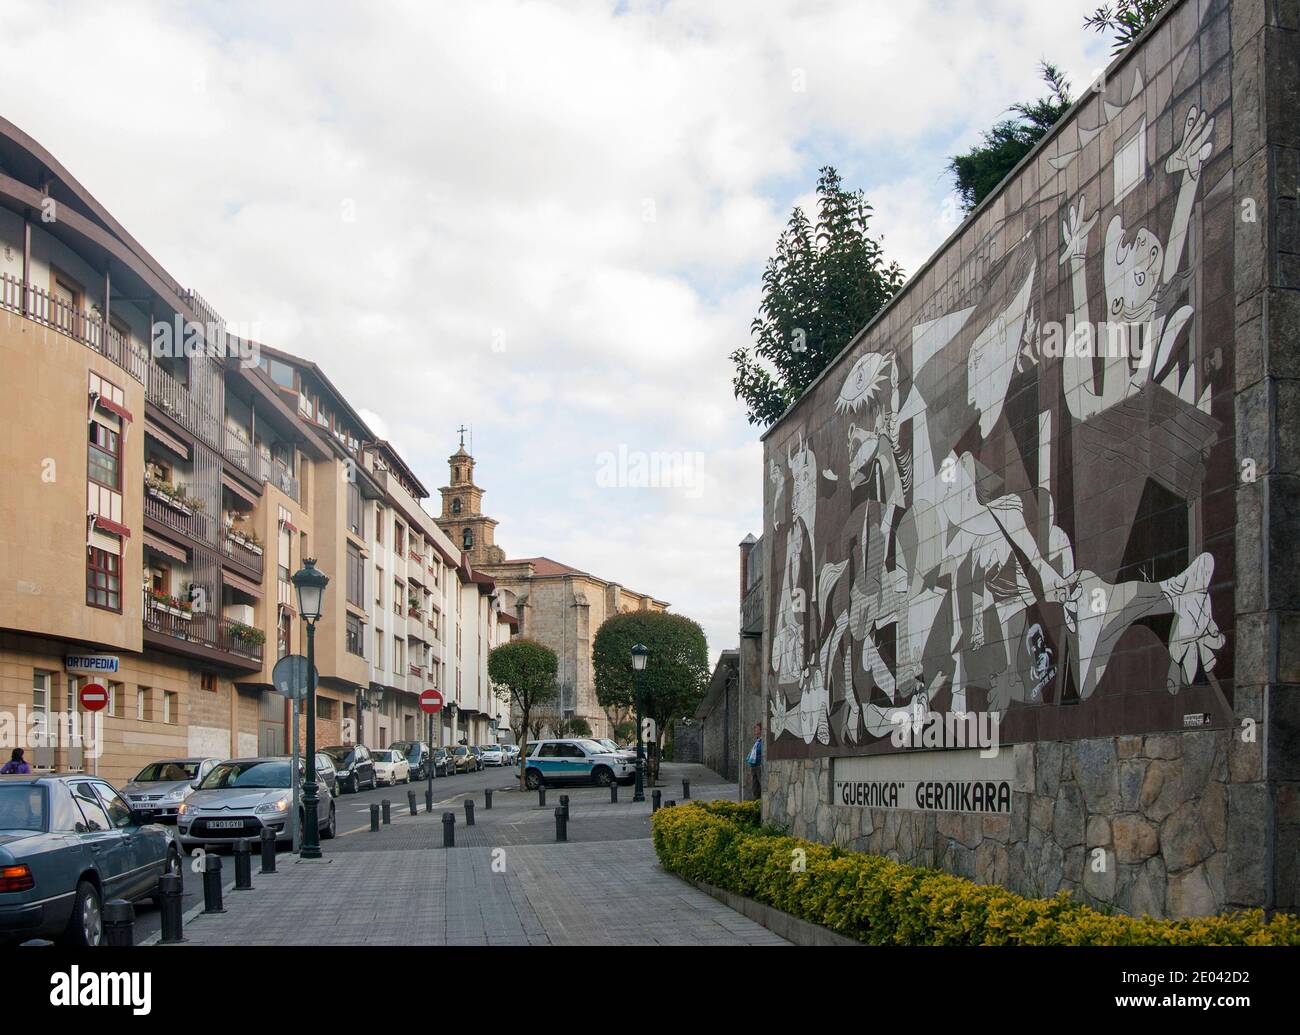 Mural based on the Picasso painting. Basque nationalists advocate that the painting be brought to the town, as can be seen in the slogan underneath. Stock Photo